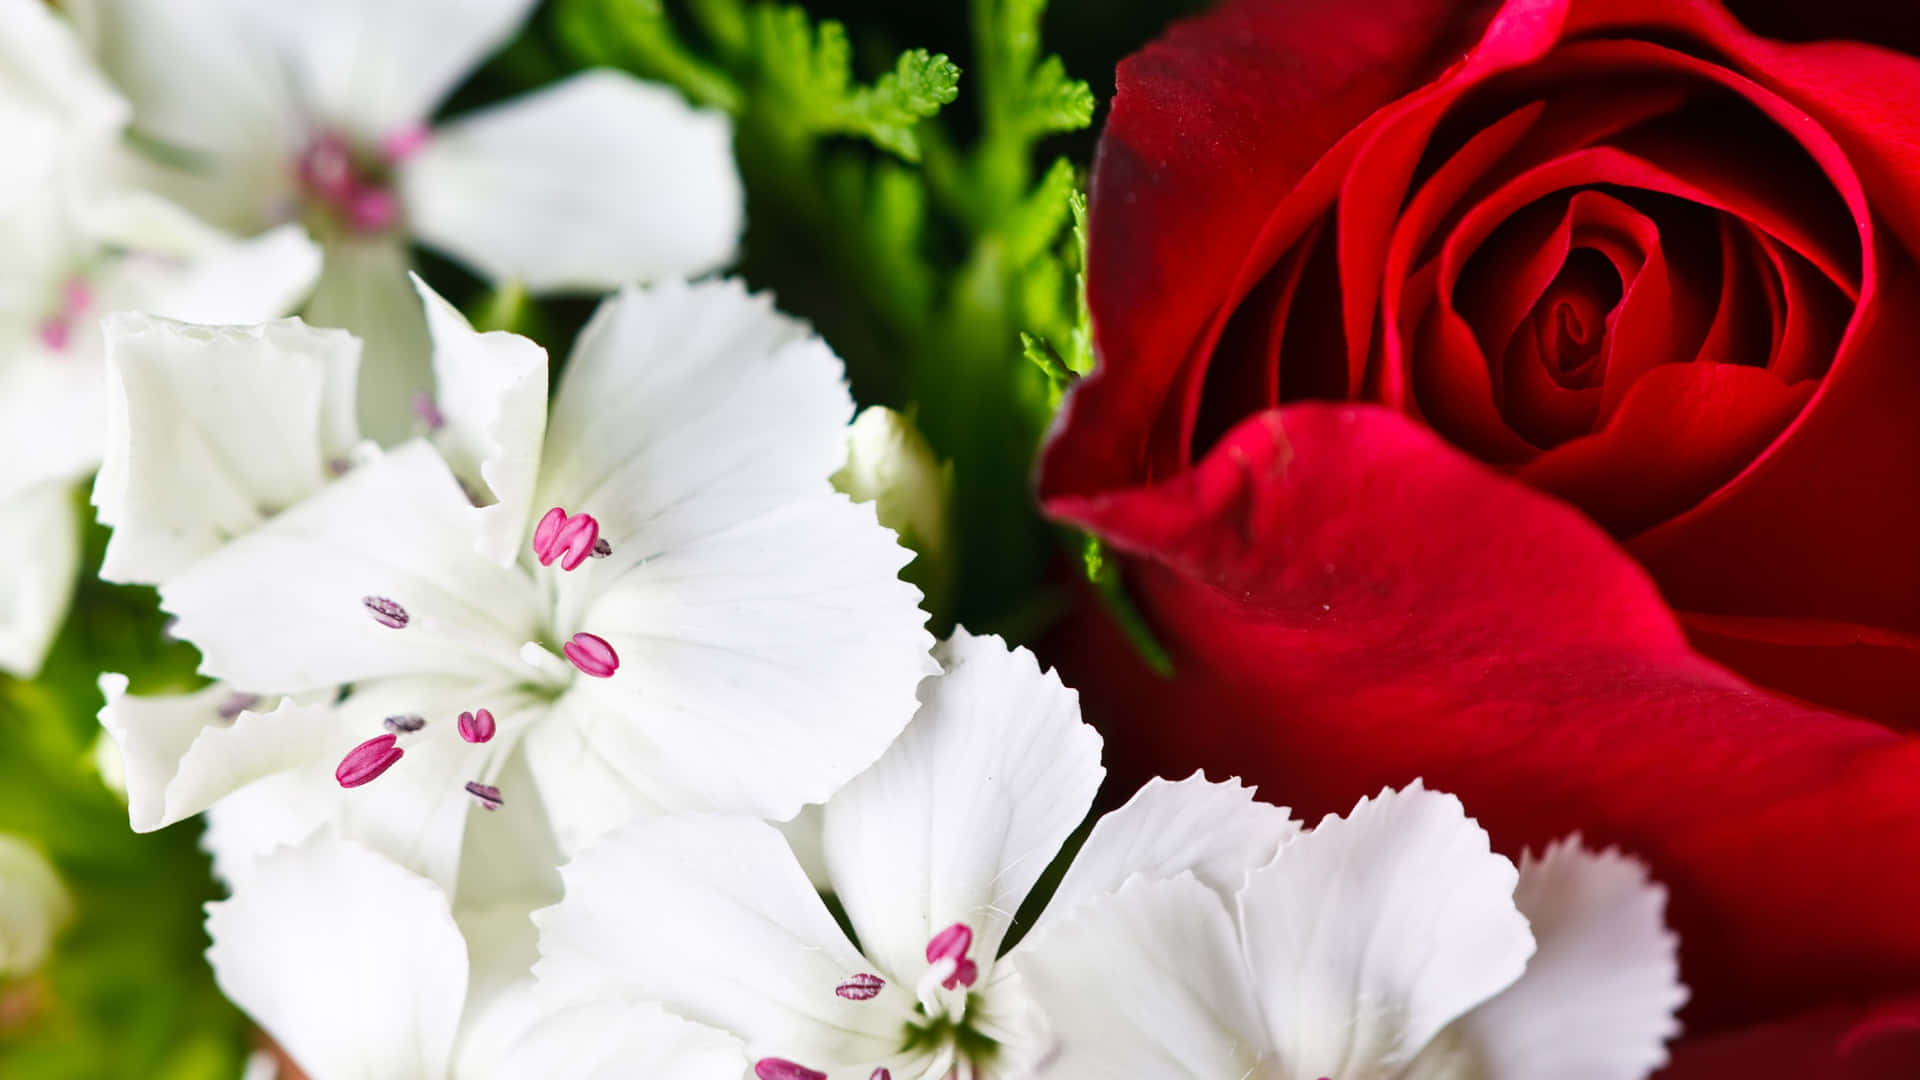 A Bouquet Of Red And White Roses Wallpaper